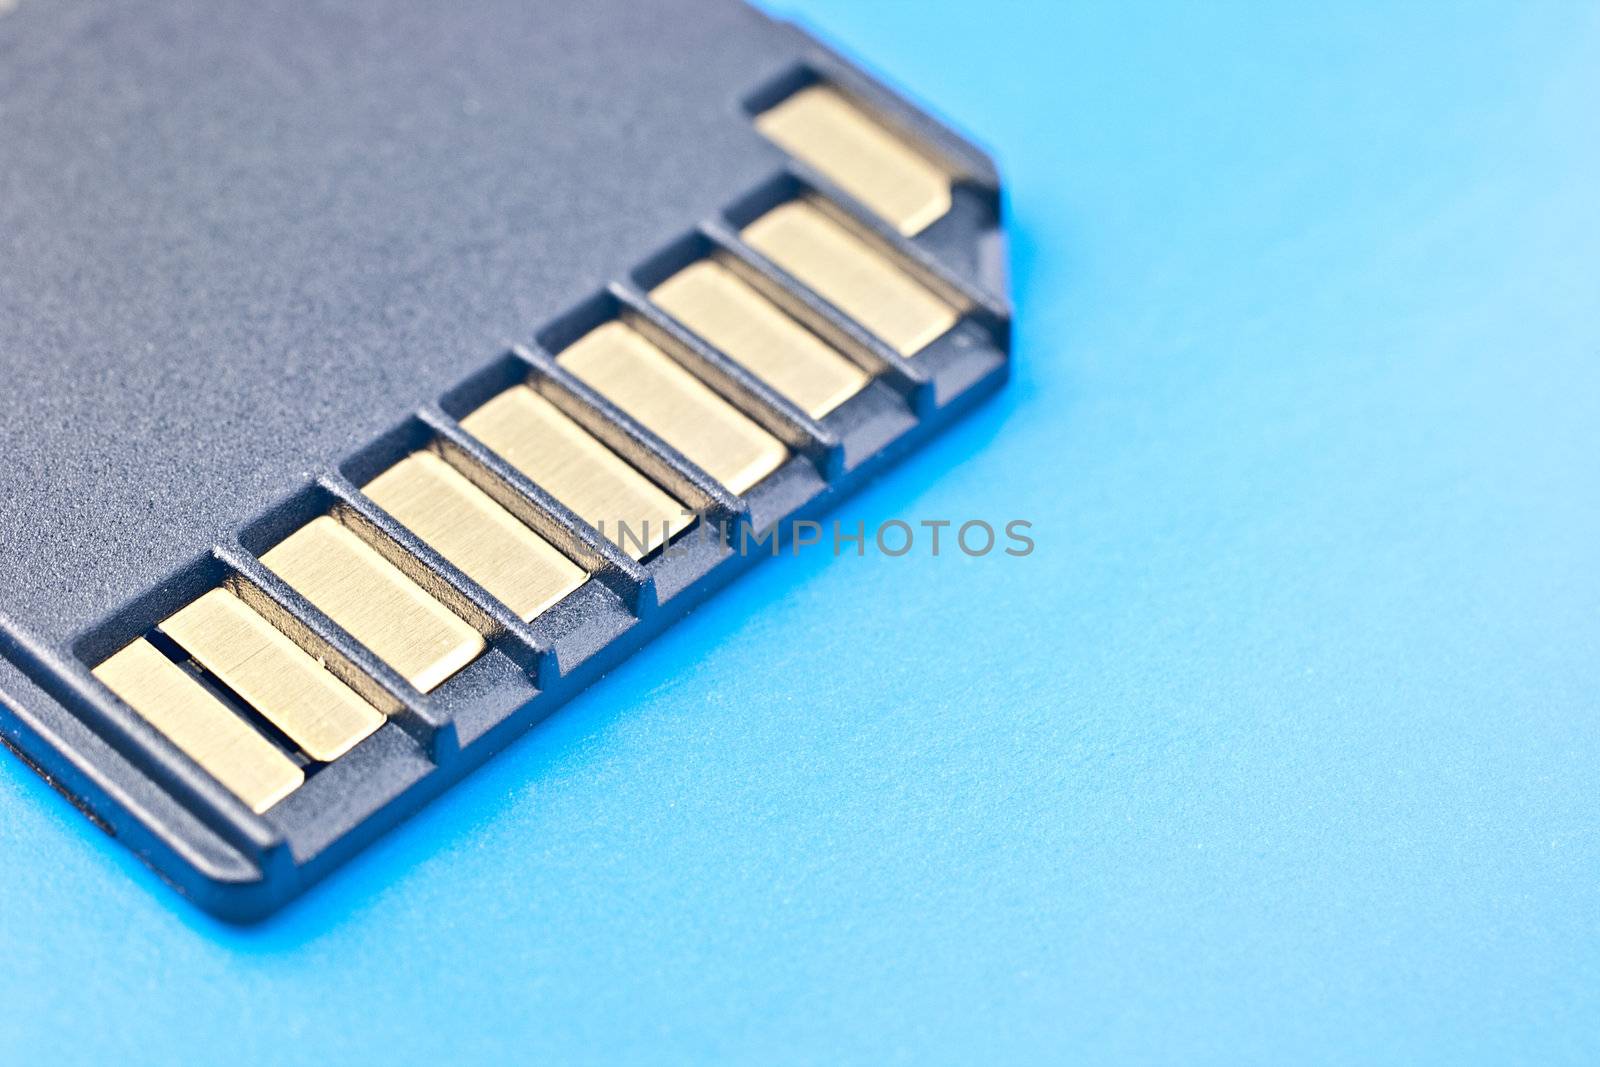 Computer chip card technology systems on a blue background.
